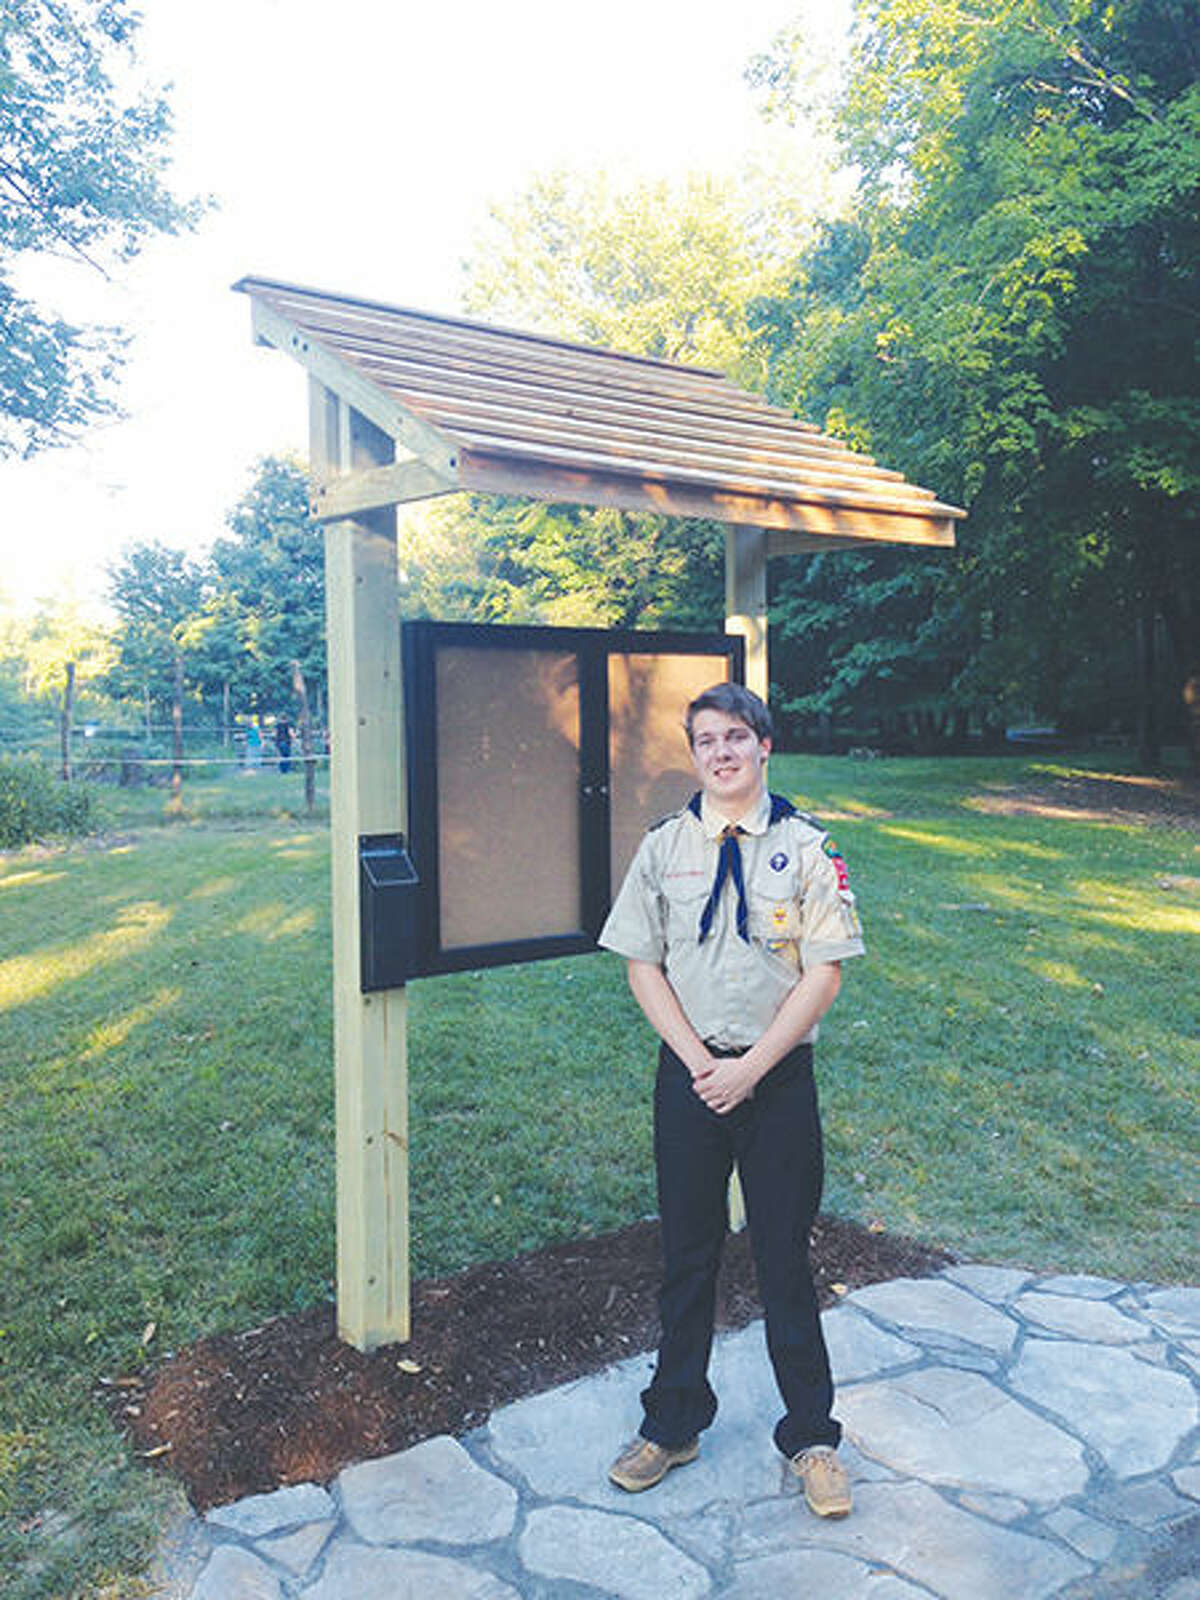 Eagle Scout Bryan Dammerich, of Glen Carbon, stands with his completed project at the Gardens at SIUE.